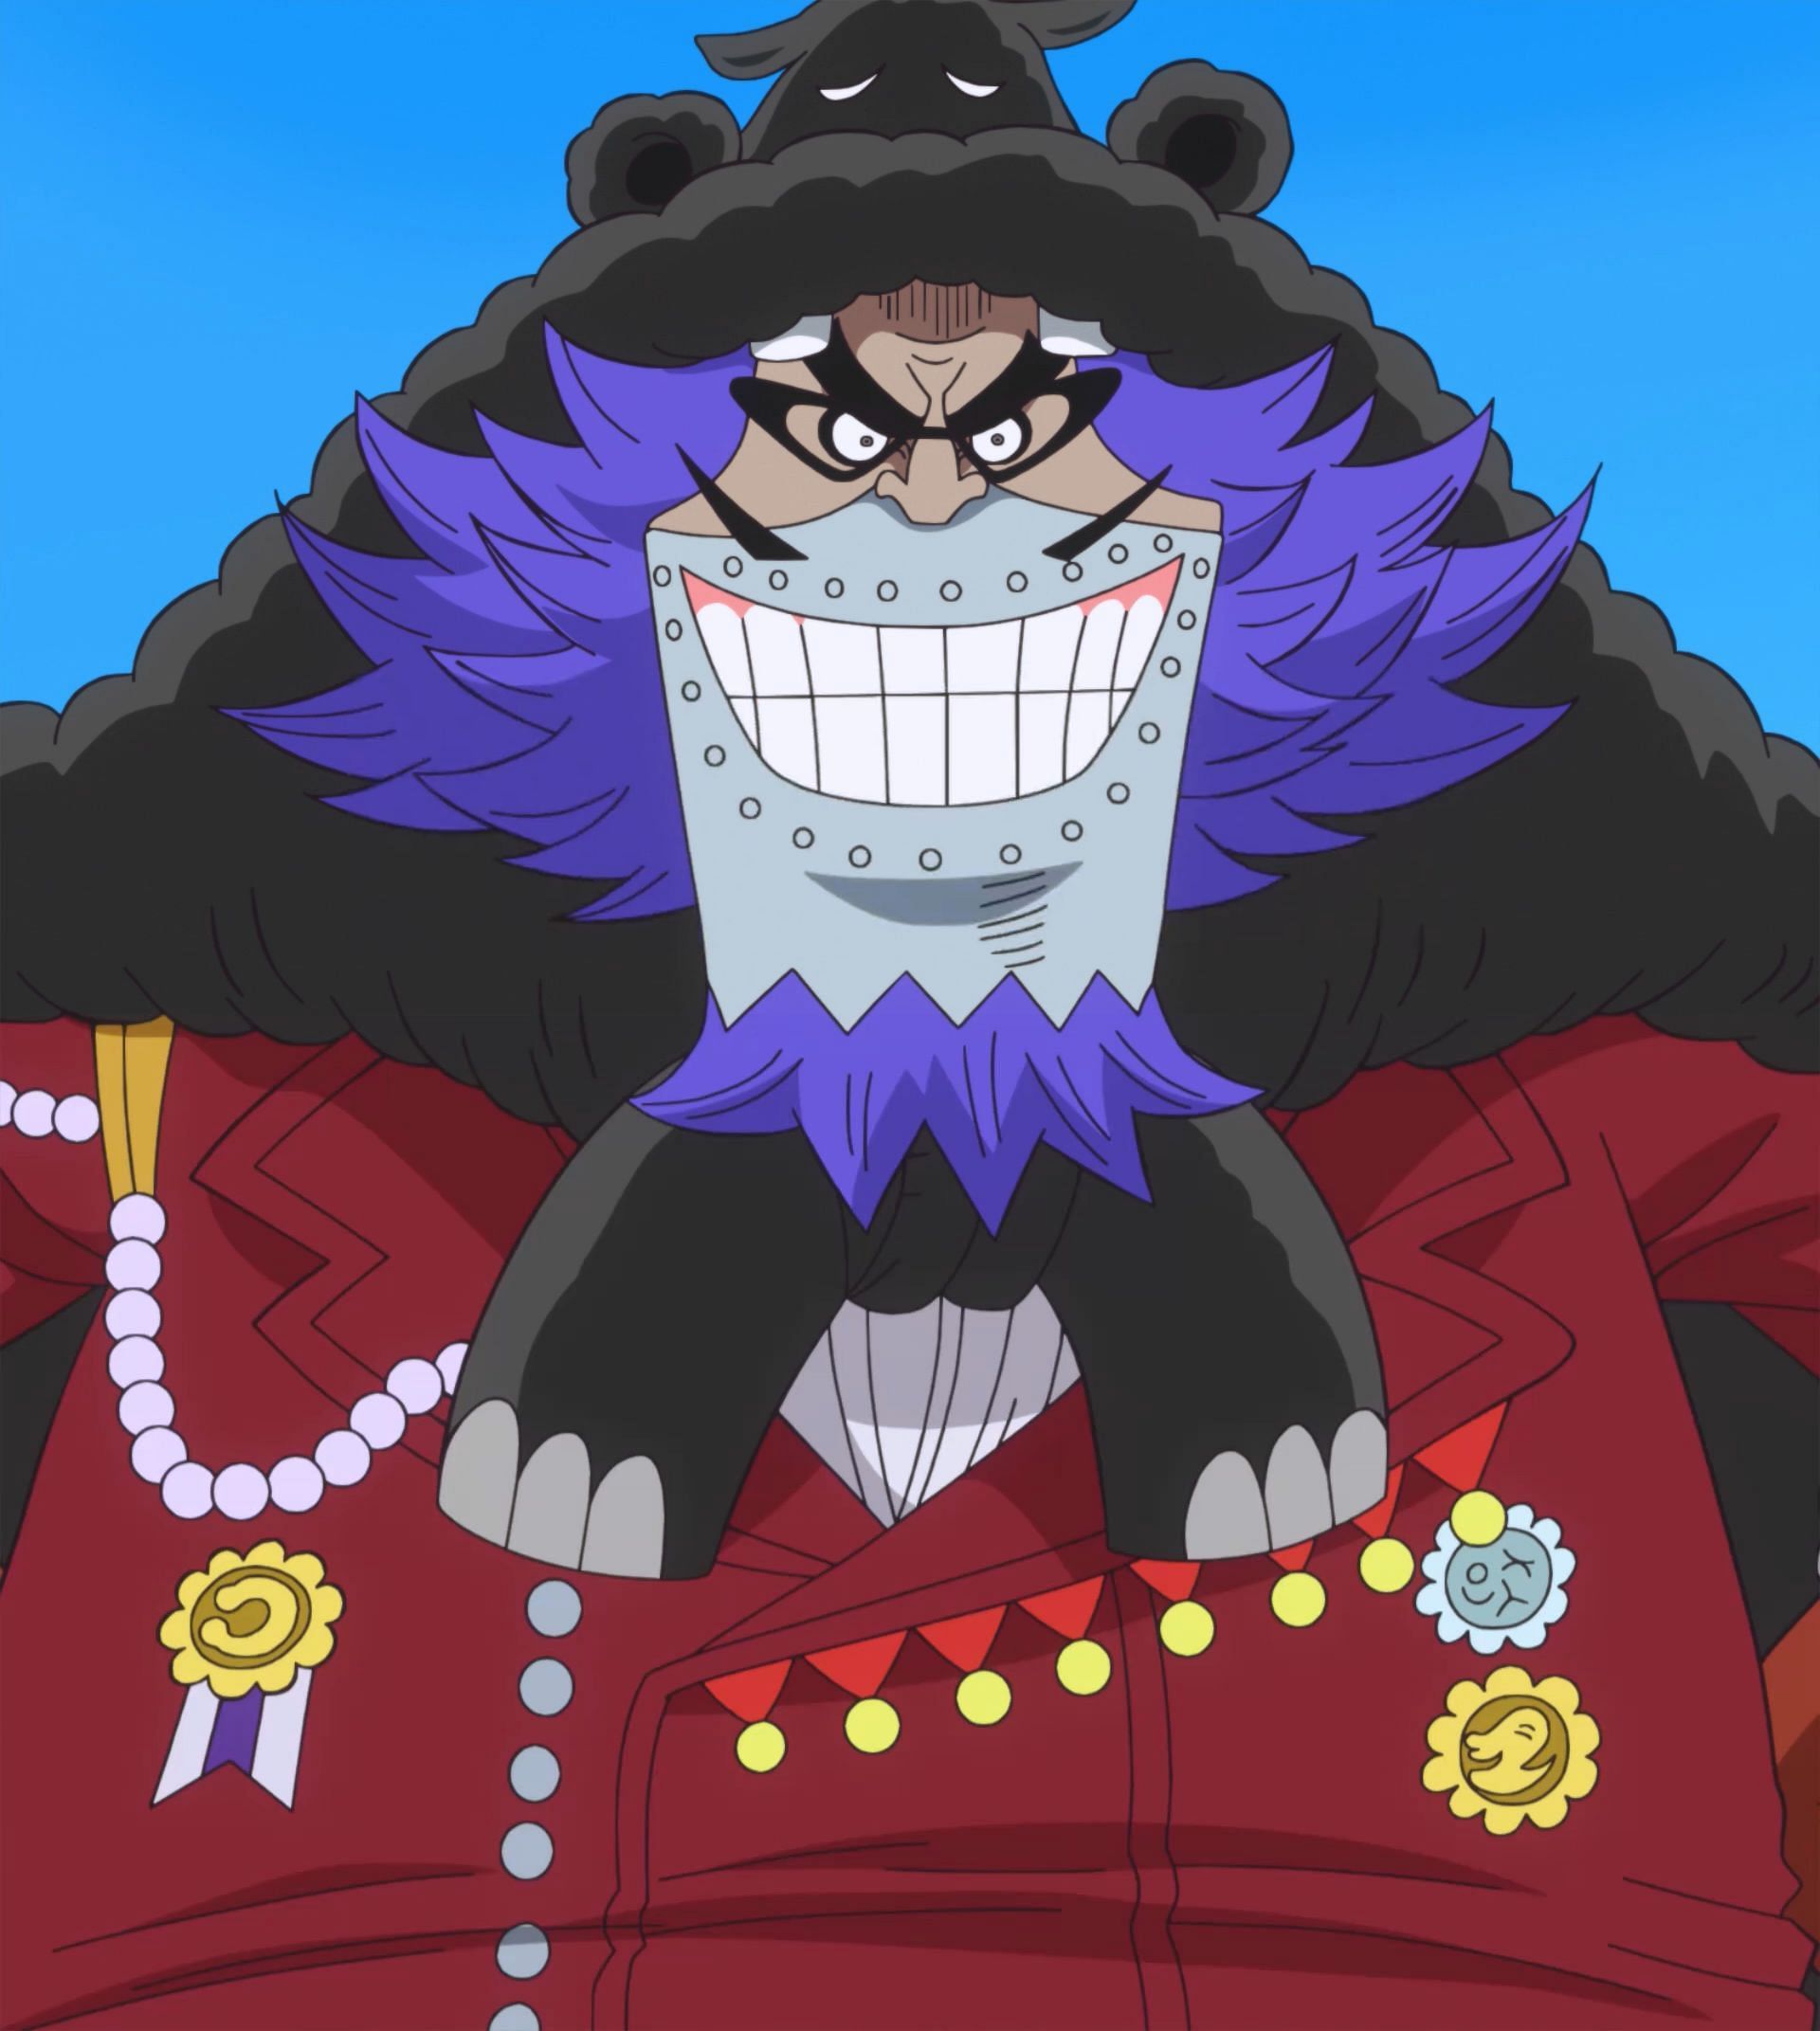 Wapol as seen during the Reverie Arc in post time skip One Piece. (Image via Toei Animation)